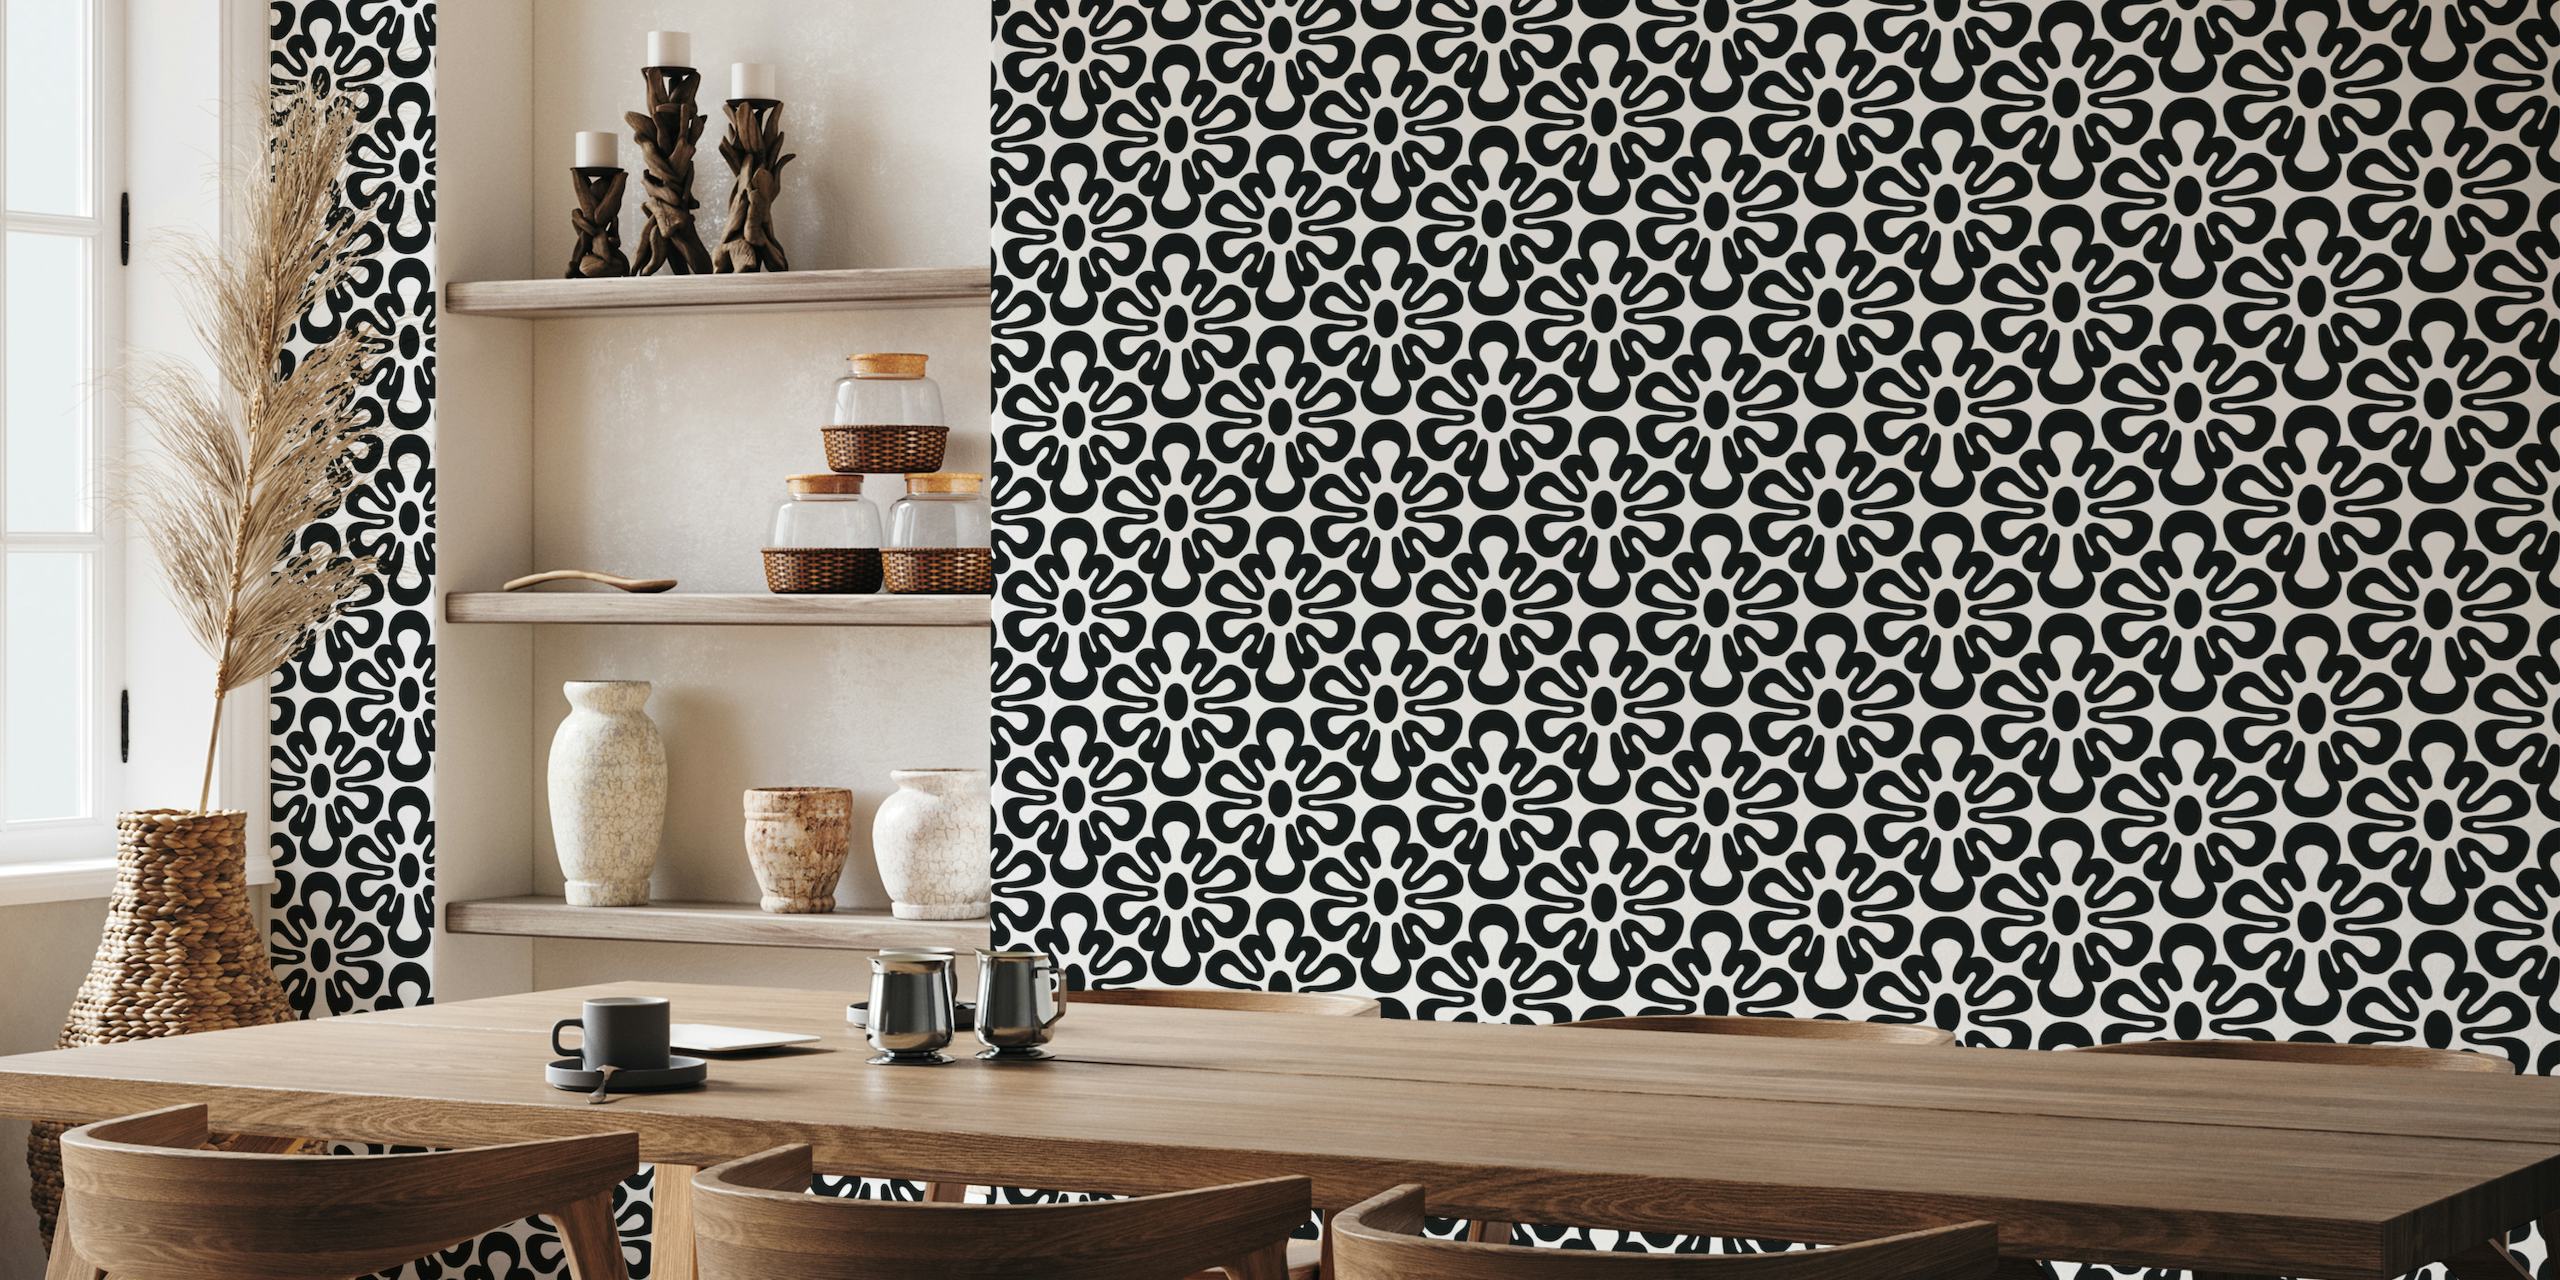 2625 D - abstract shapes pattern, black and white wallpaper